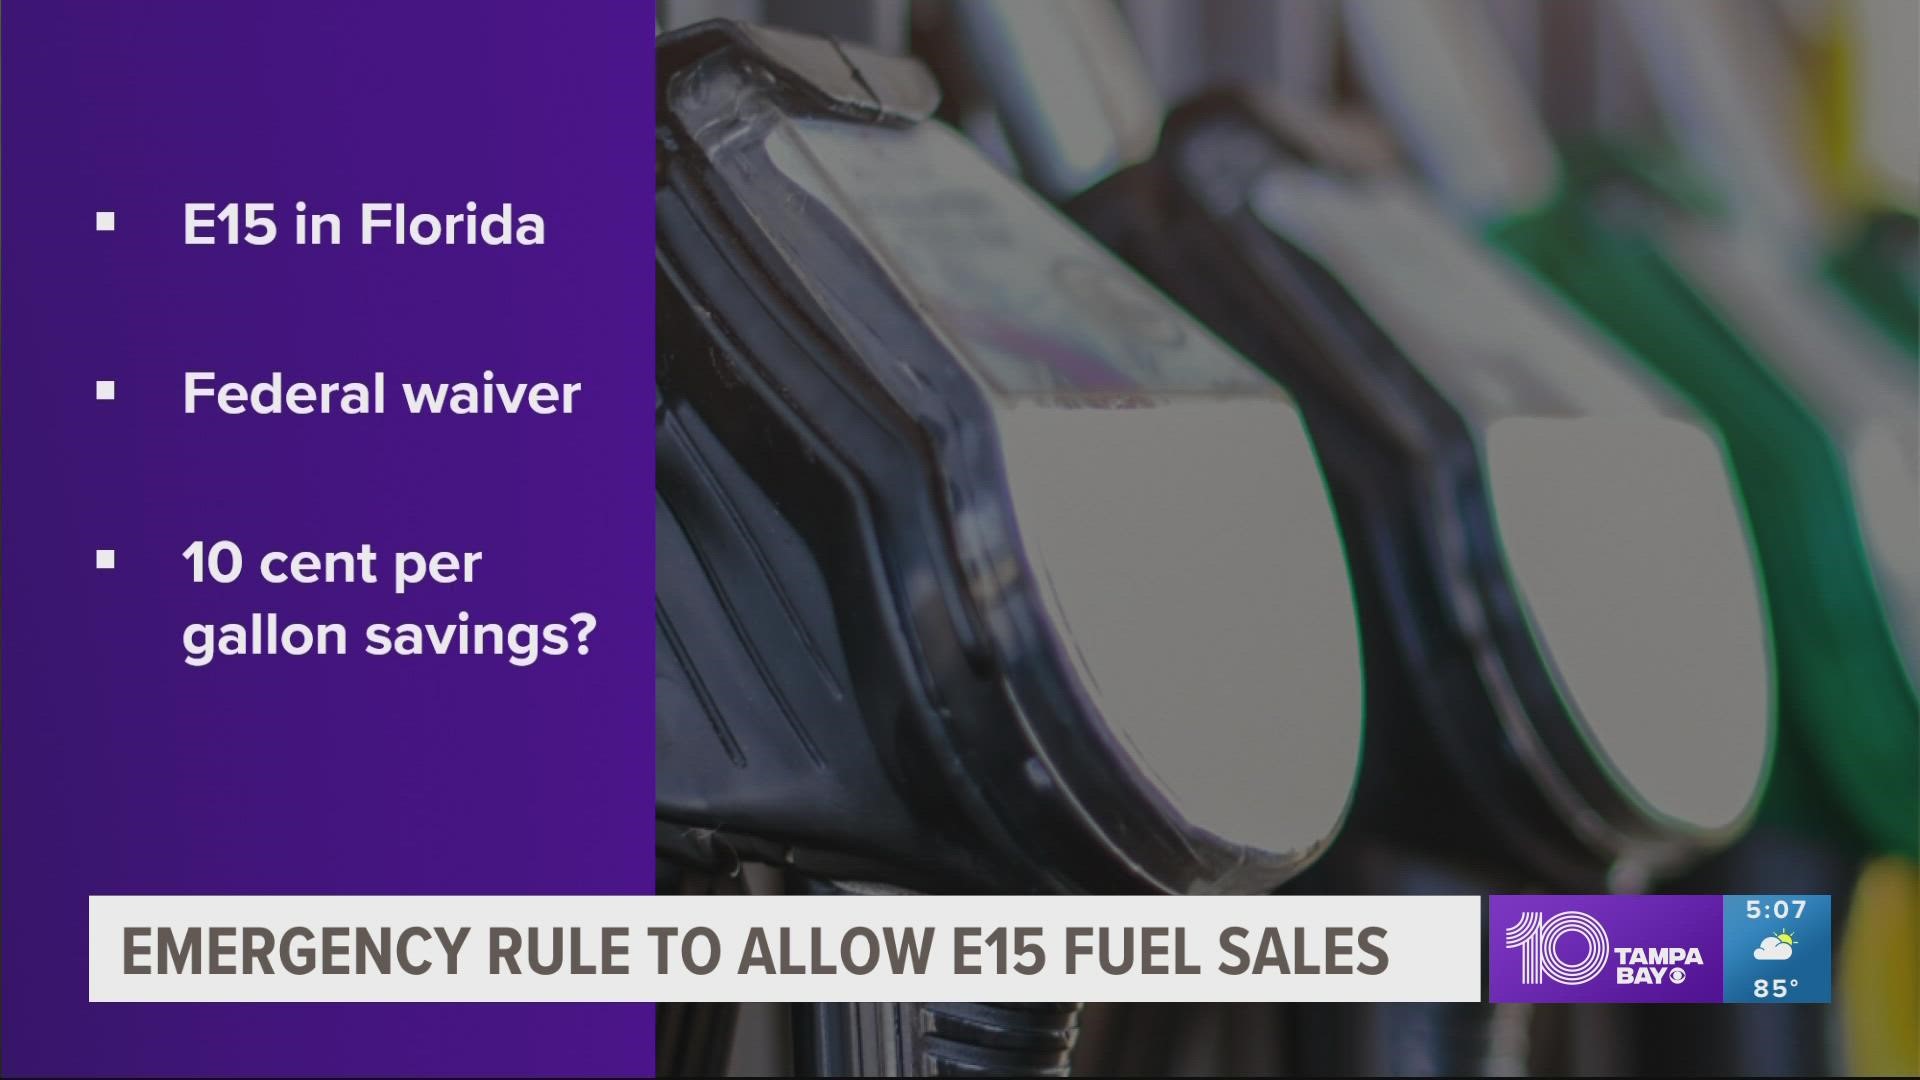 Fried says people could find savings of 10 cents per gallon, but not many gas stations sell the E15 fuel.